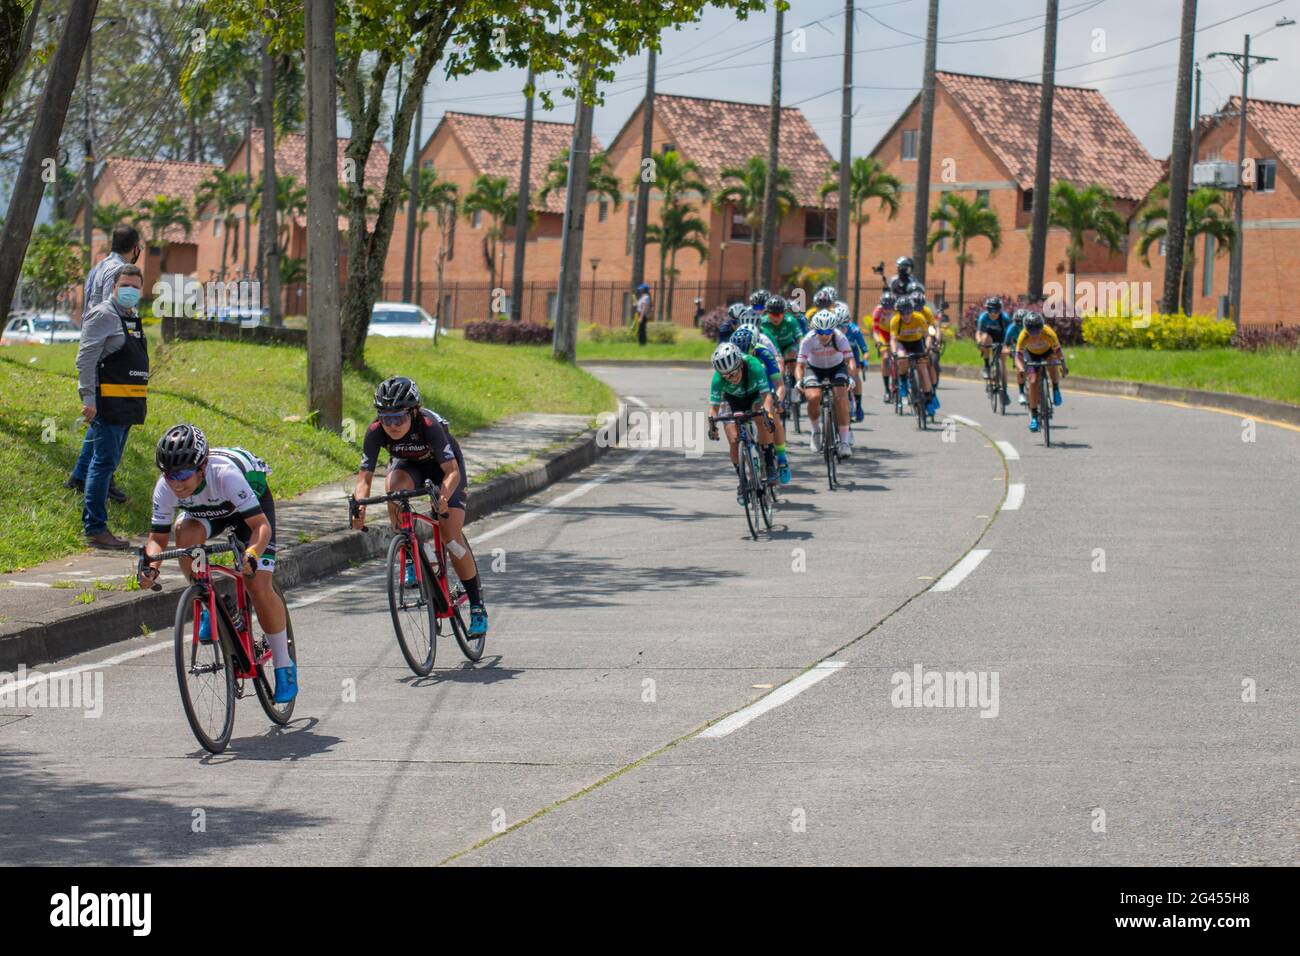 Pereira, Colombia. 18th June, 2021. Cyclists from the Antioquia Cycling leage participate in the Women's Colombian National Road Race Championship in the streets de Pereira, Colombia on June 18, 2021 Credit: Long Visual Press/Alamy Live News Stock Photo